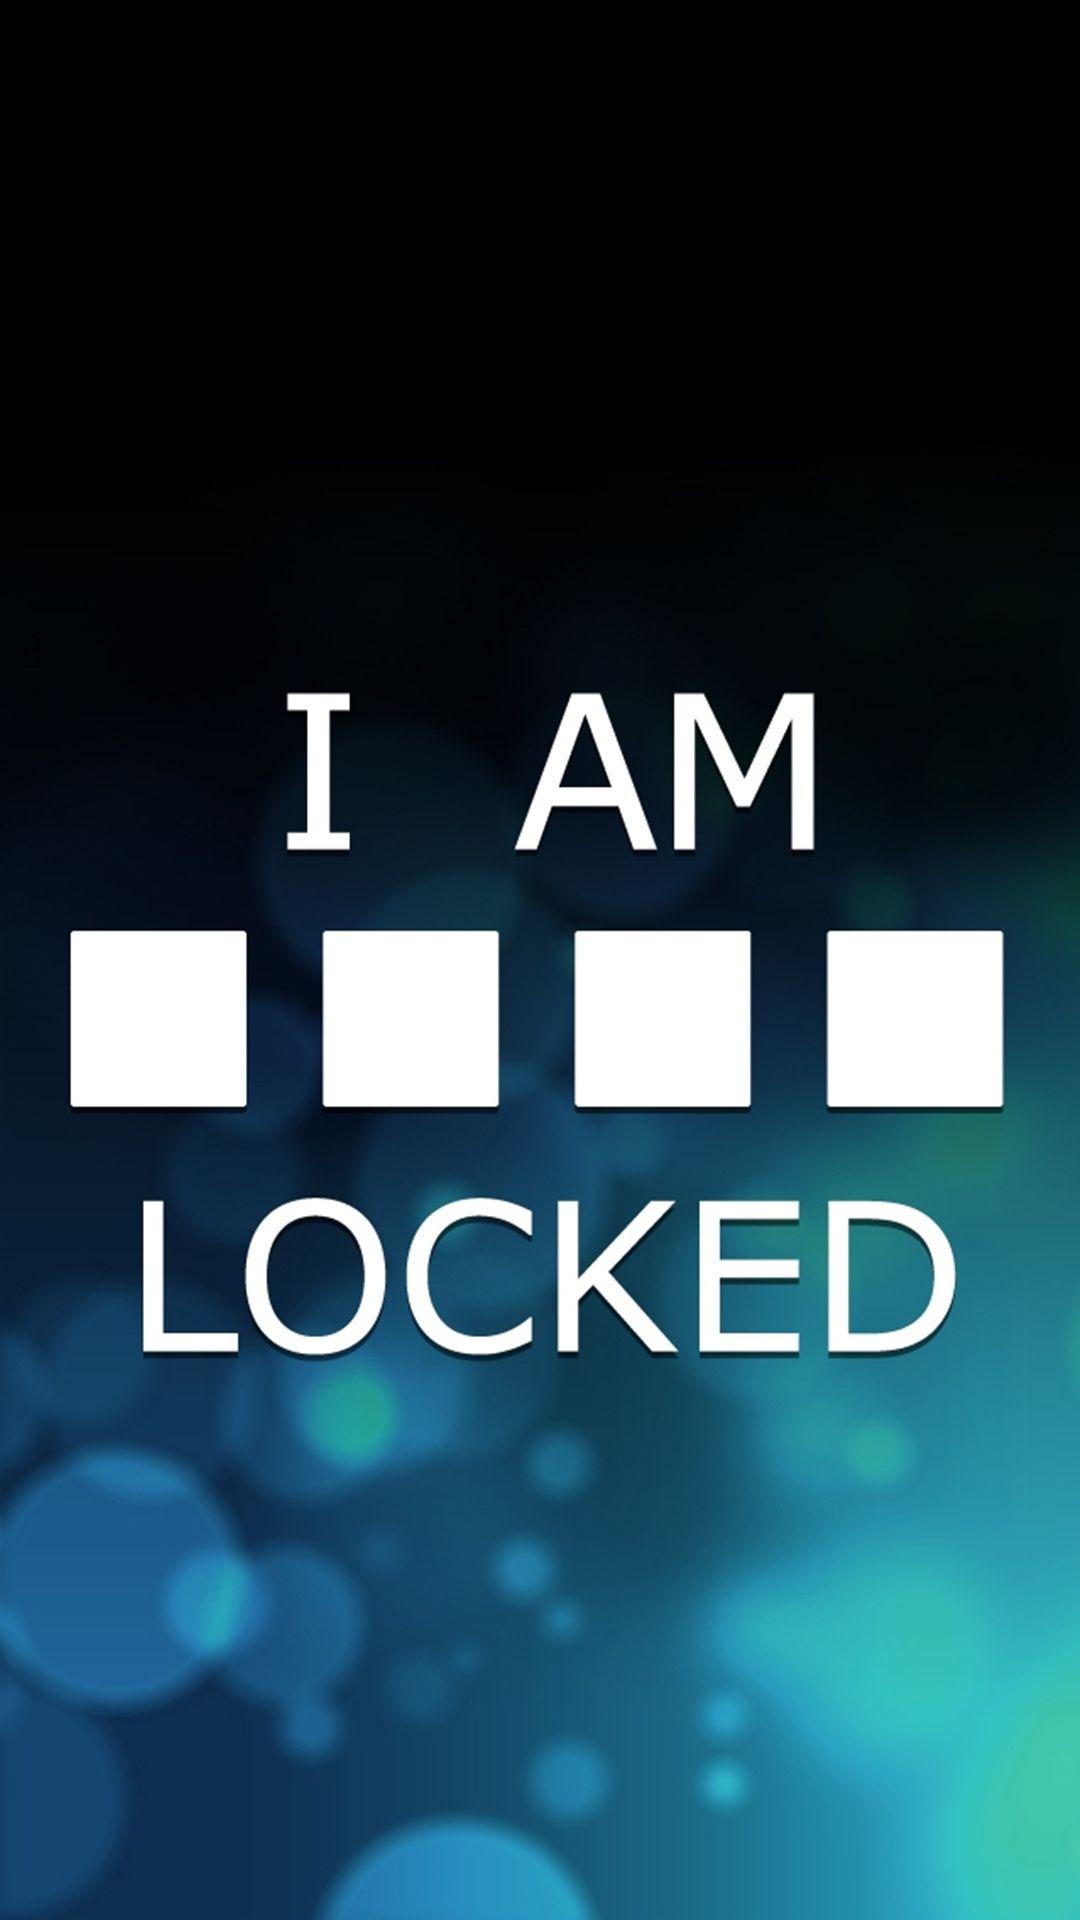 I Am Locked 1080 x 1920 Wallpaper available for free